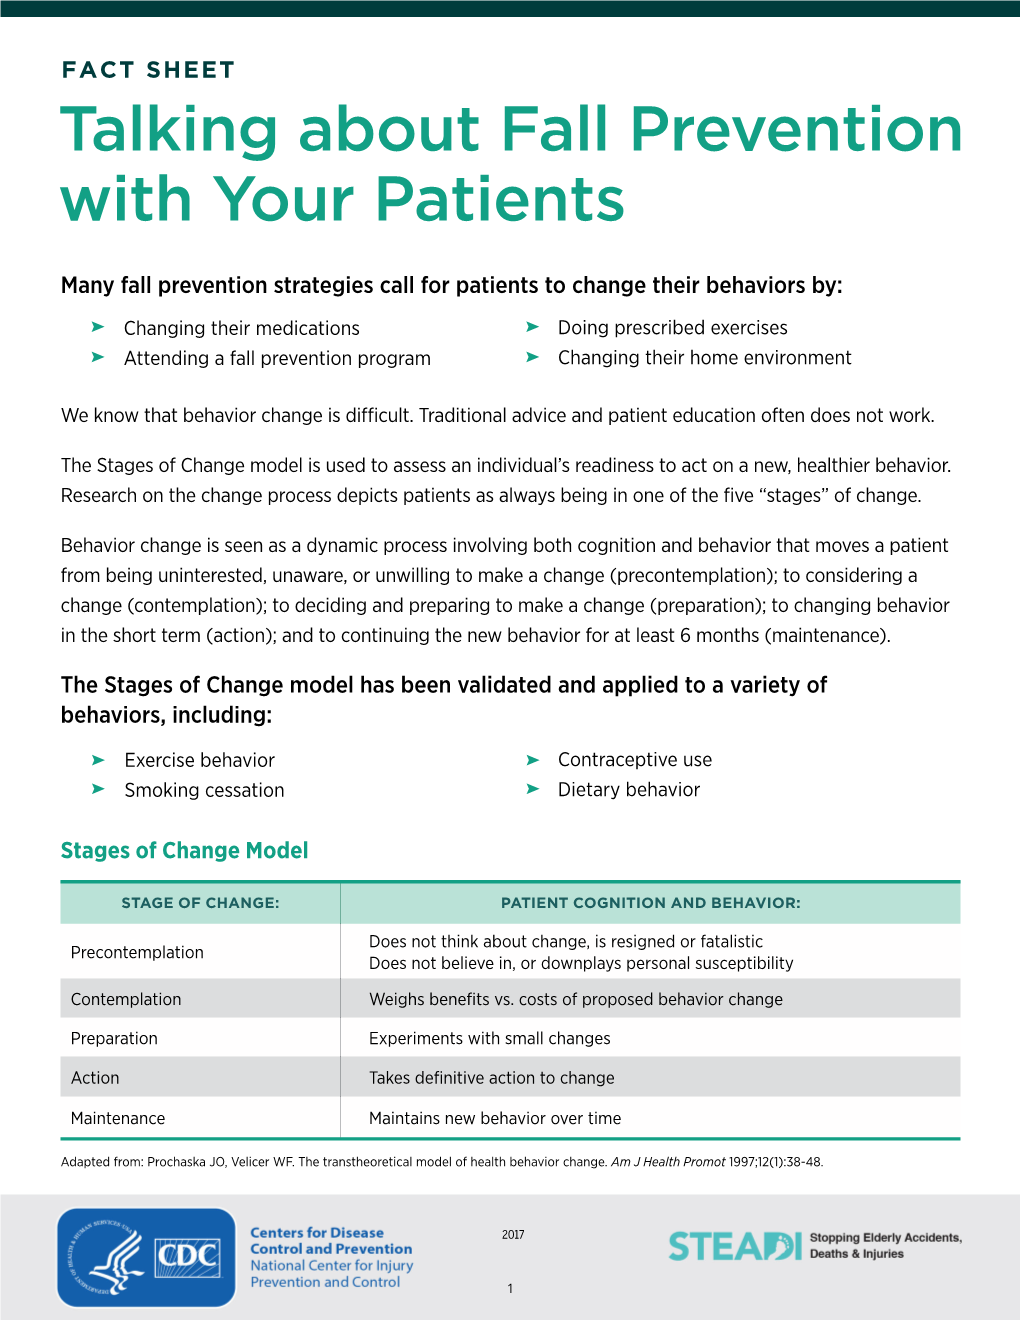 FACT SHEET Talking About Fall Prevention with Your Patients